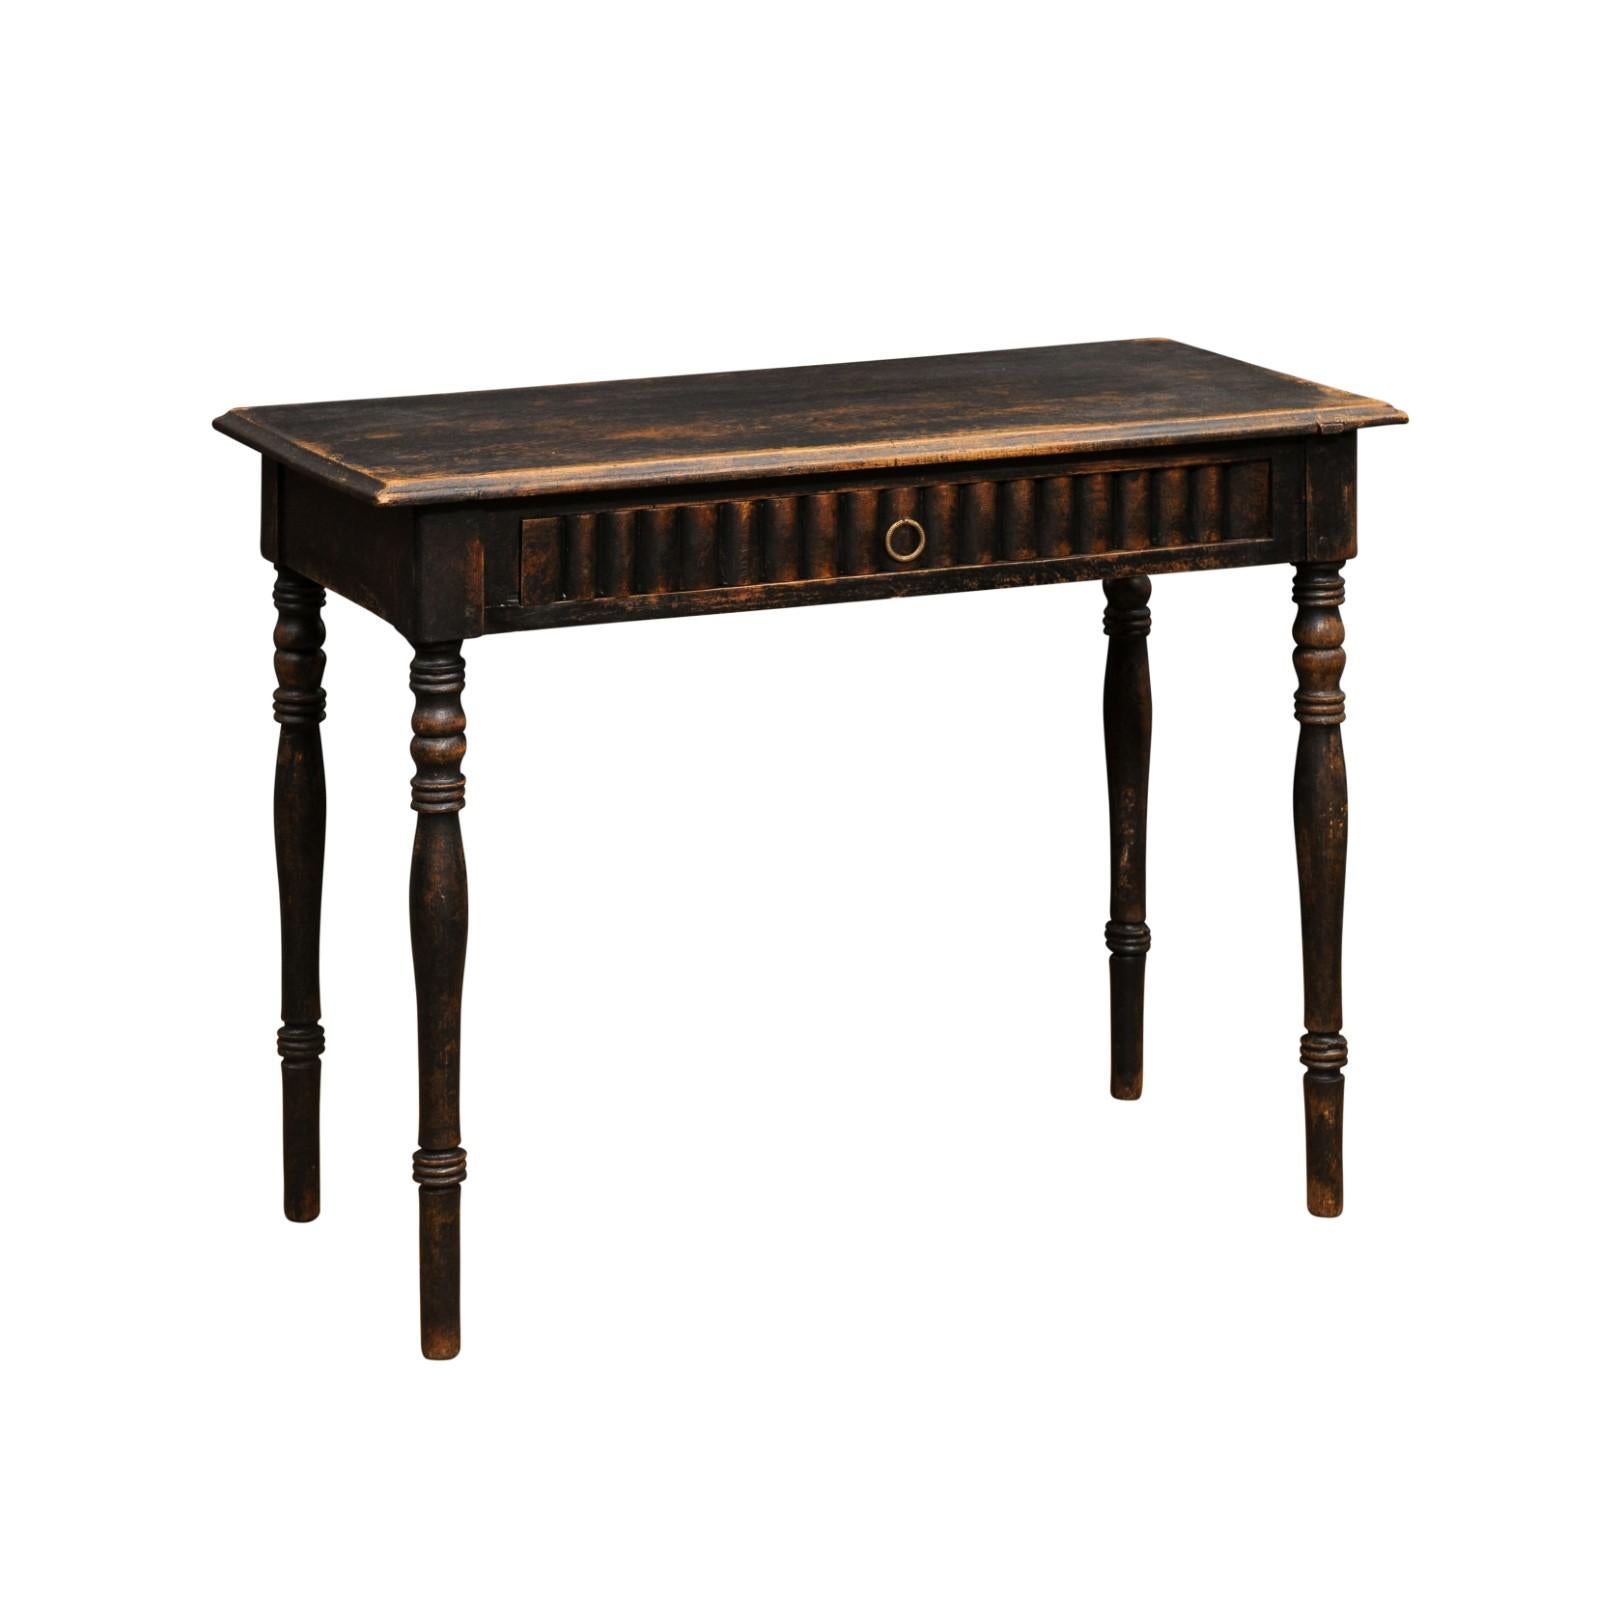 A Swedish painted wood desk from the mid 19th century, with reeded motifs, turned legs and dark patina. Created in Sweden during the third quarter of the 19th century, this painted desk features a rectangular top with beveled edges, sitting above a